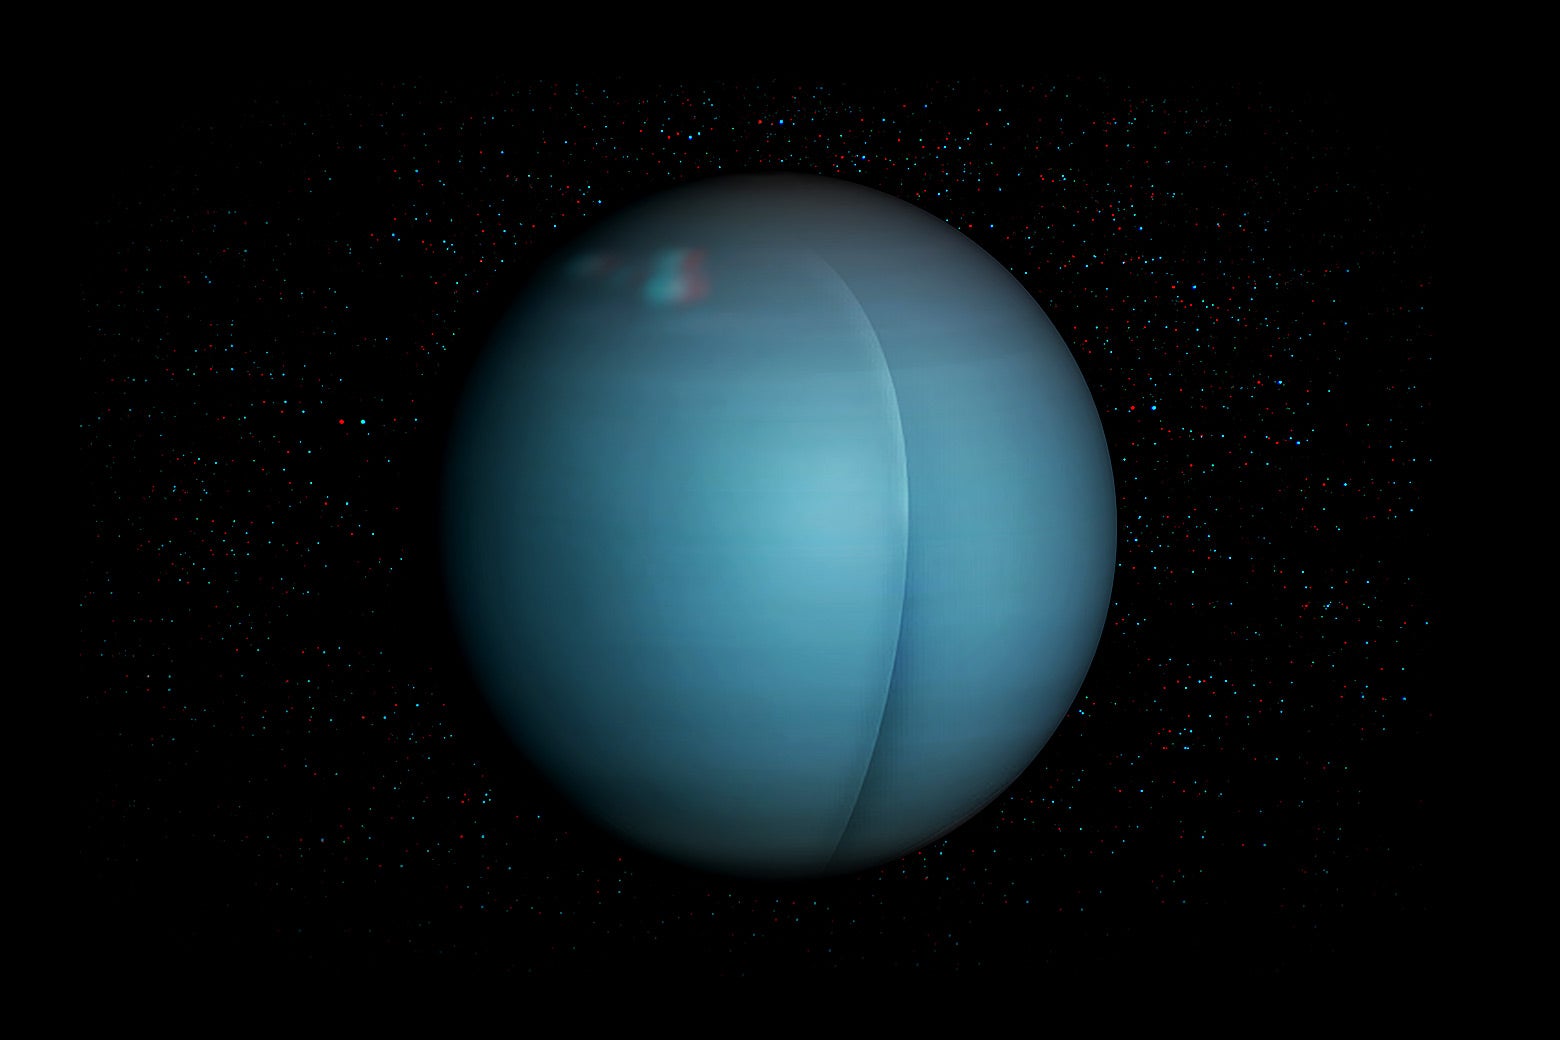 A 3D rendering of Uranus modified to look like a butt.